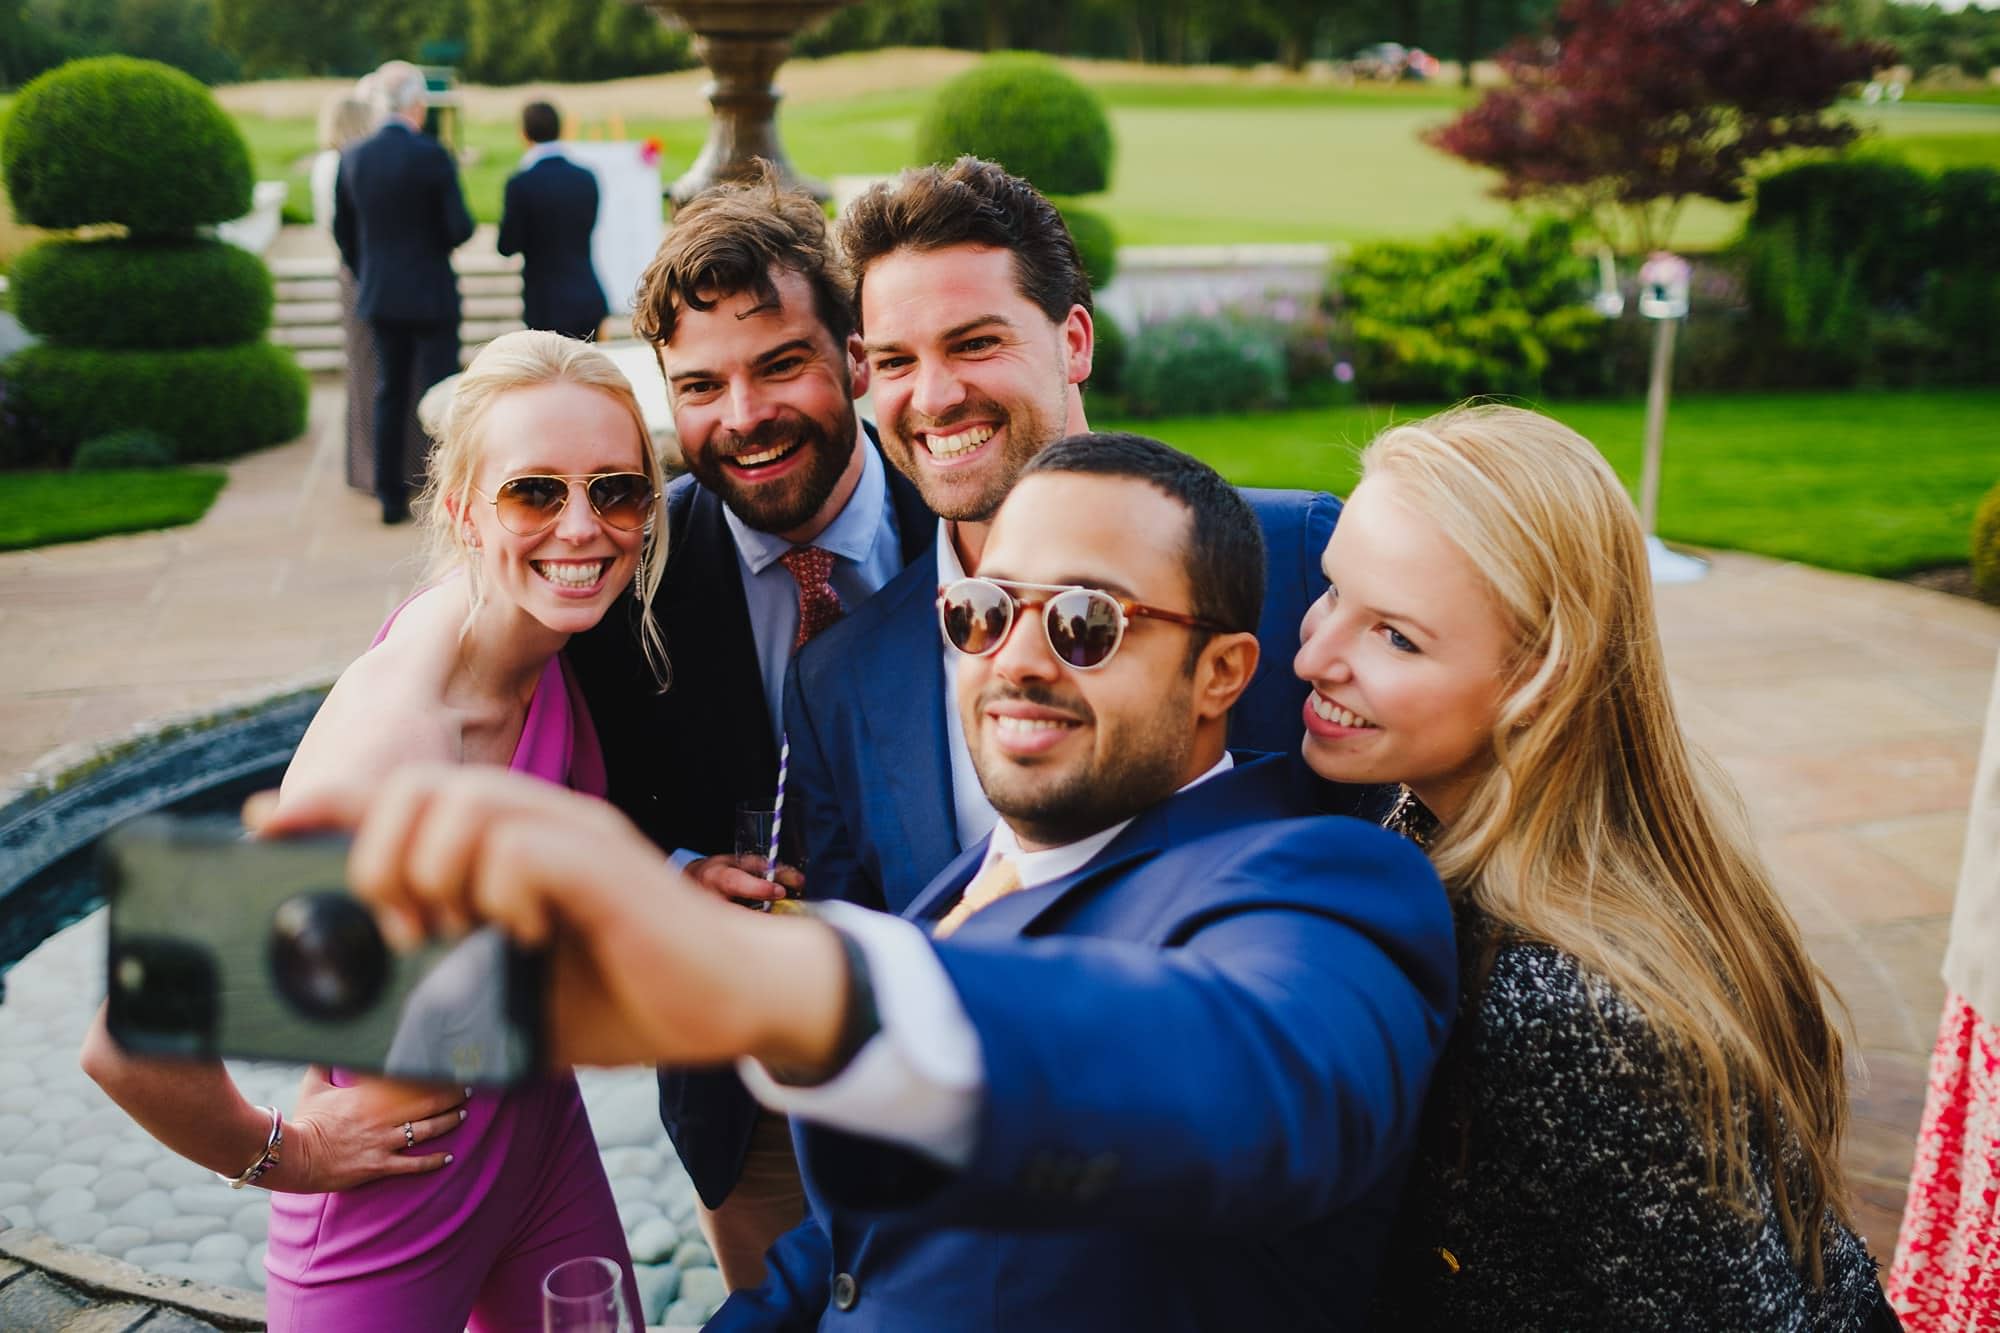 guests snap a selfie together at a Queenwood Golf Course event